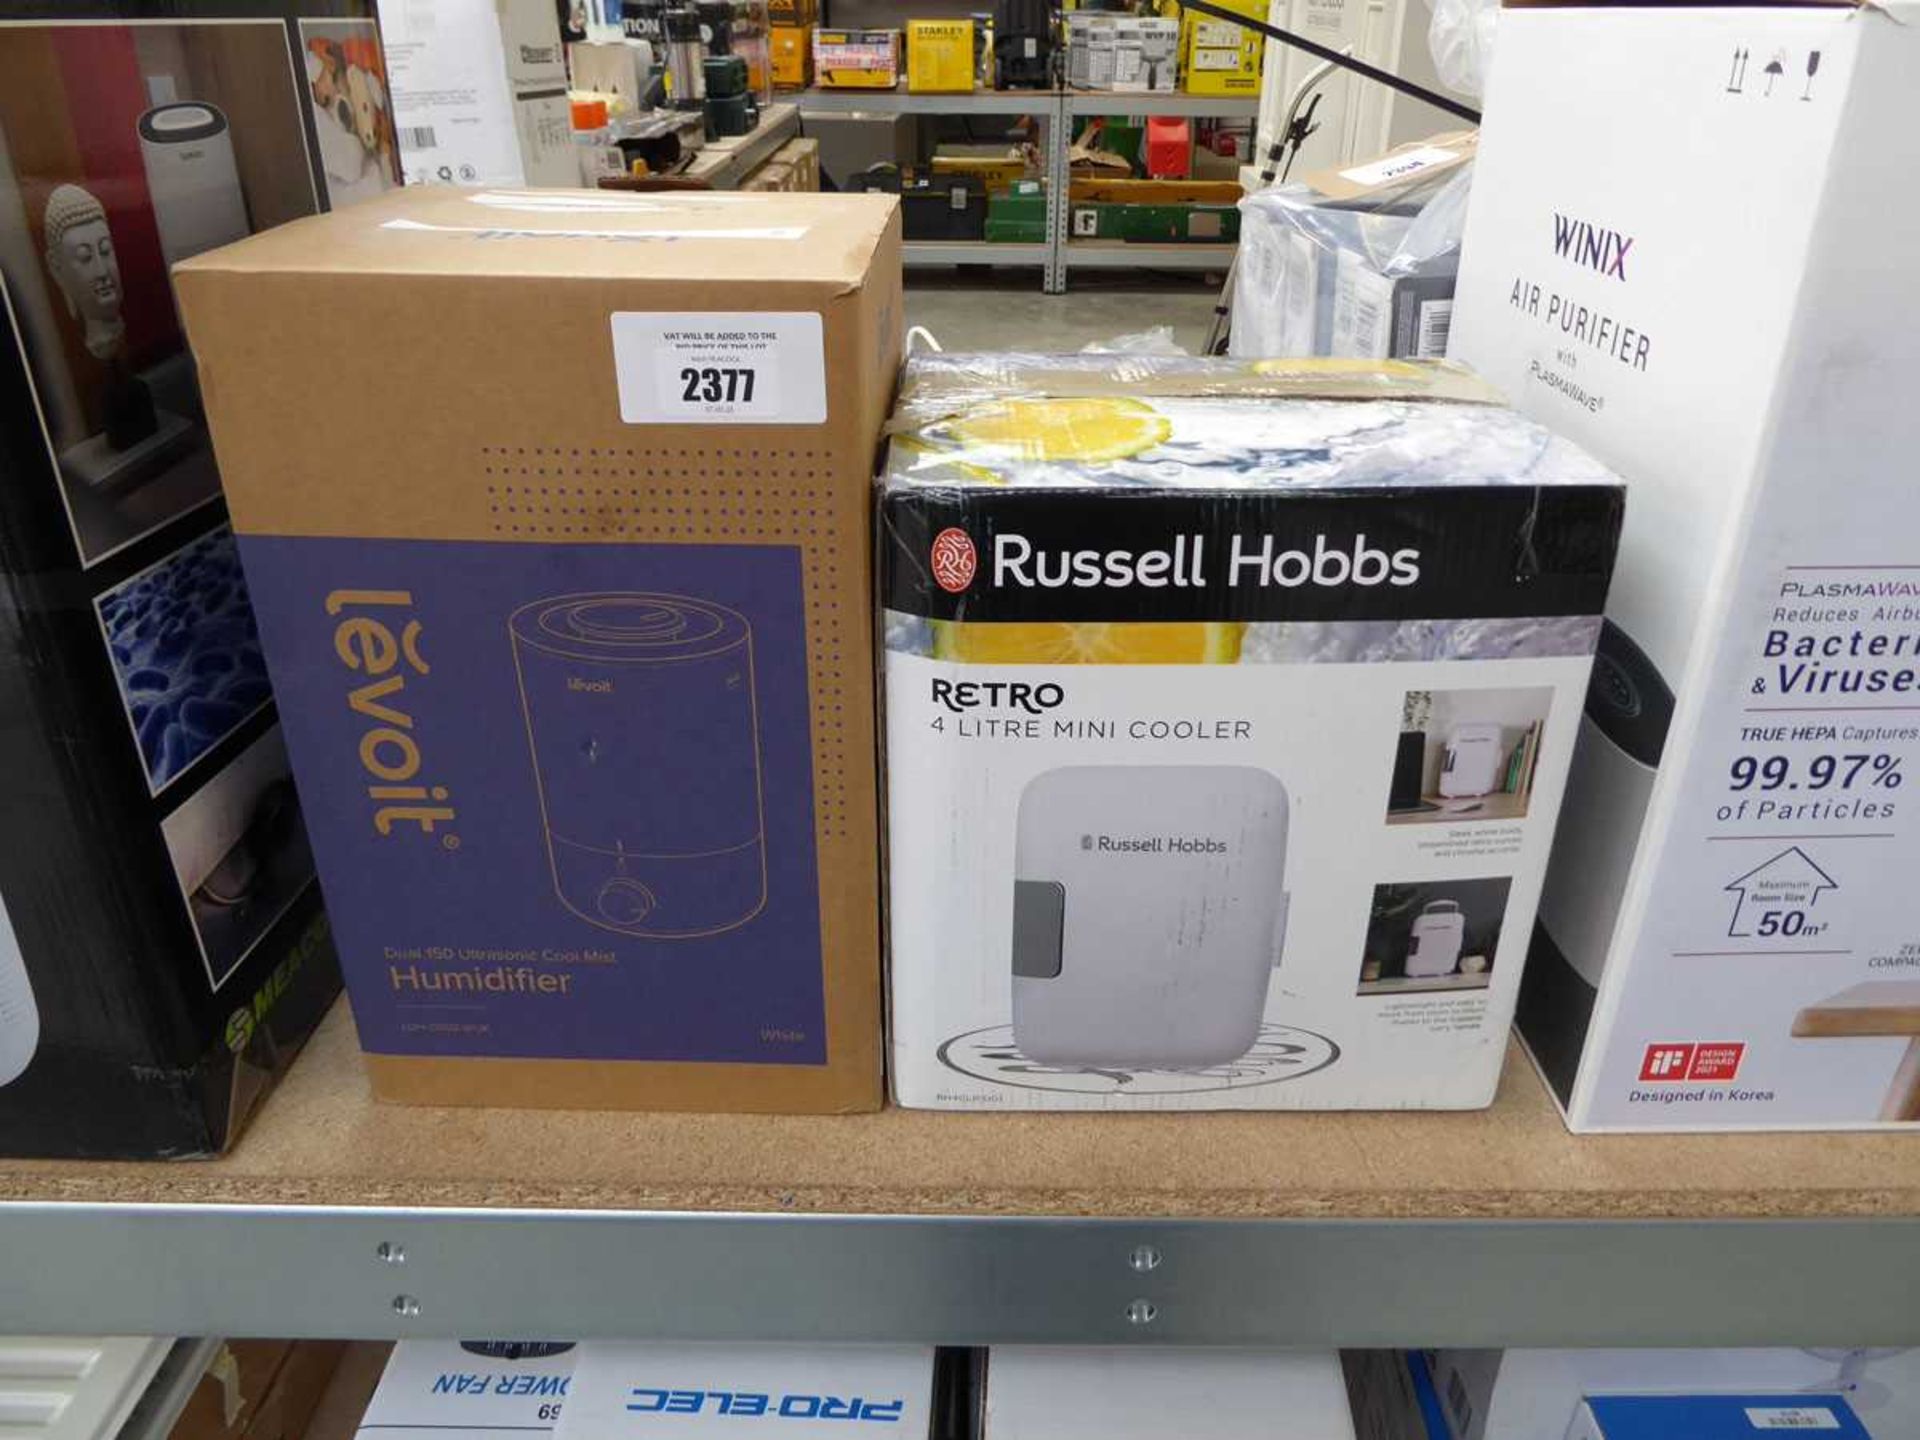 +VAT Boxed Levoit humidifier together with a Russell Hobbs mini cooler